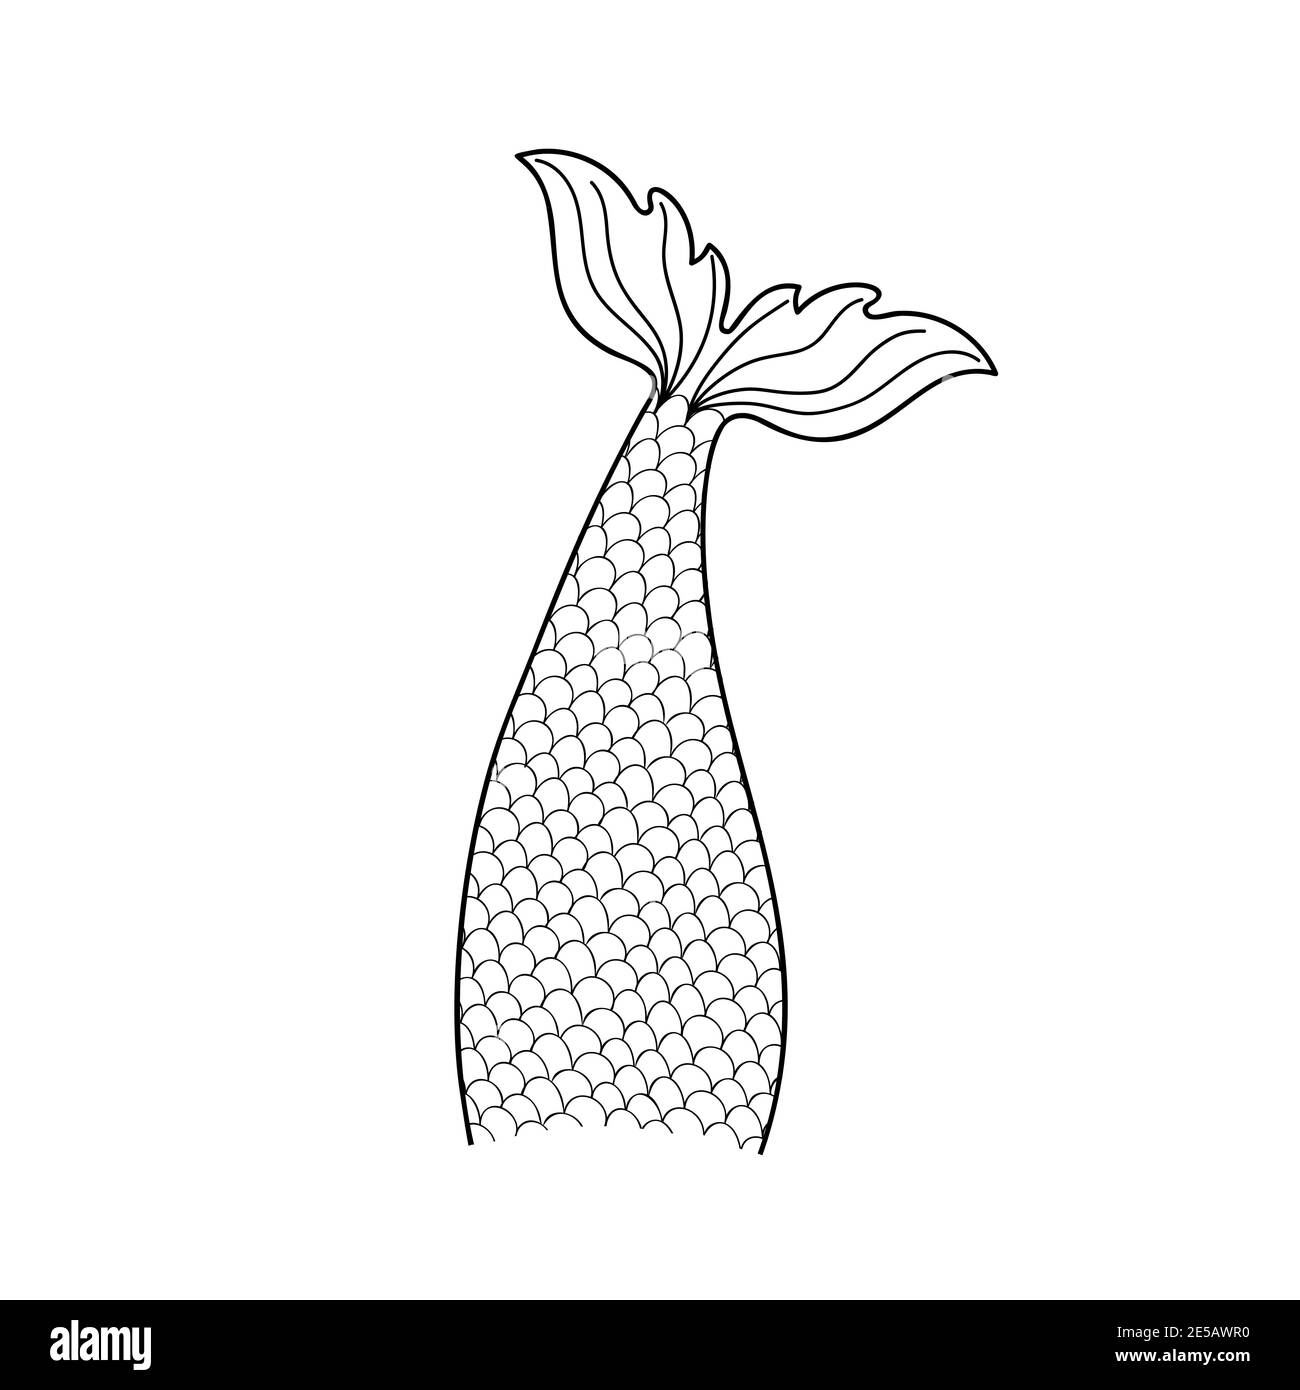 Hand drawn mermaid tail isolated on white background. Vector doodle outline illustration for print design or coloring books. Stock Vector